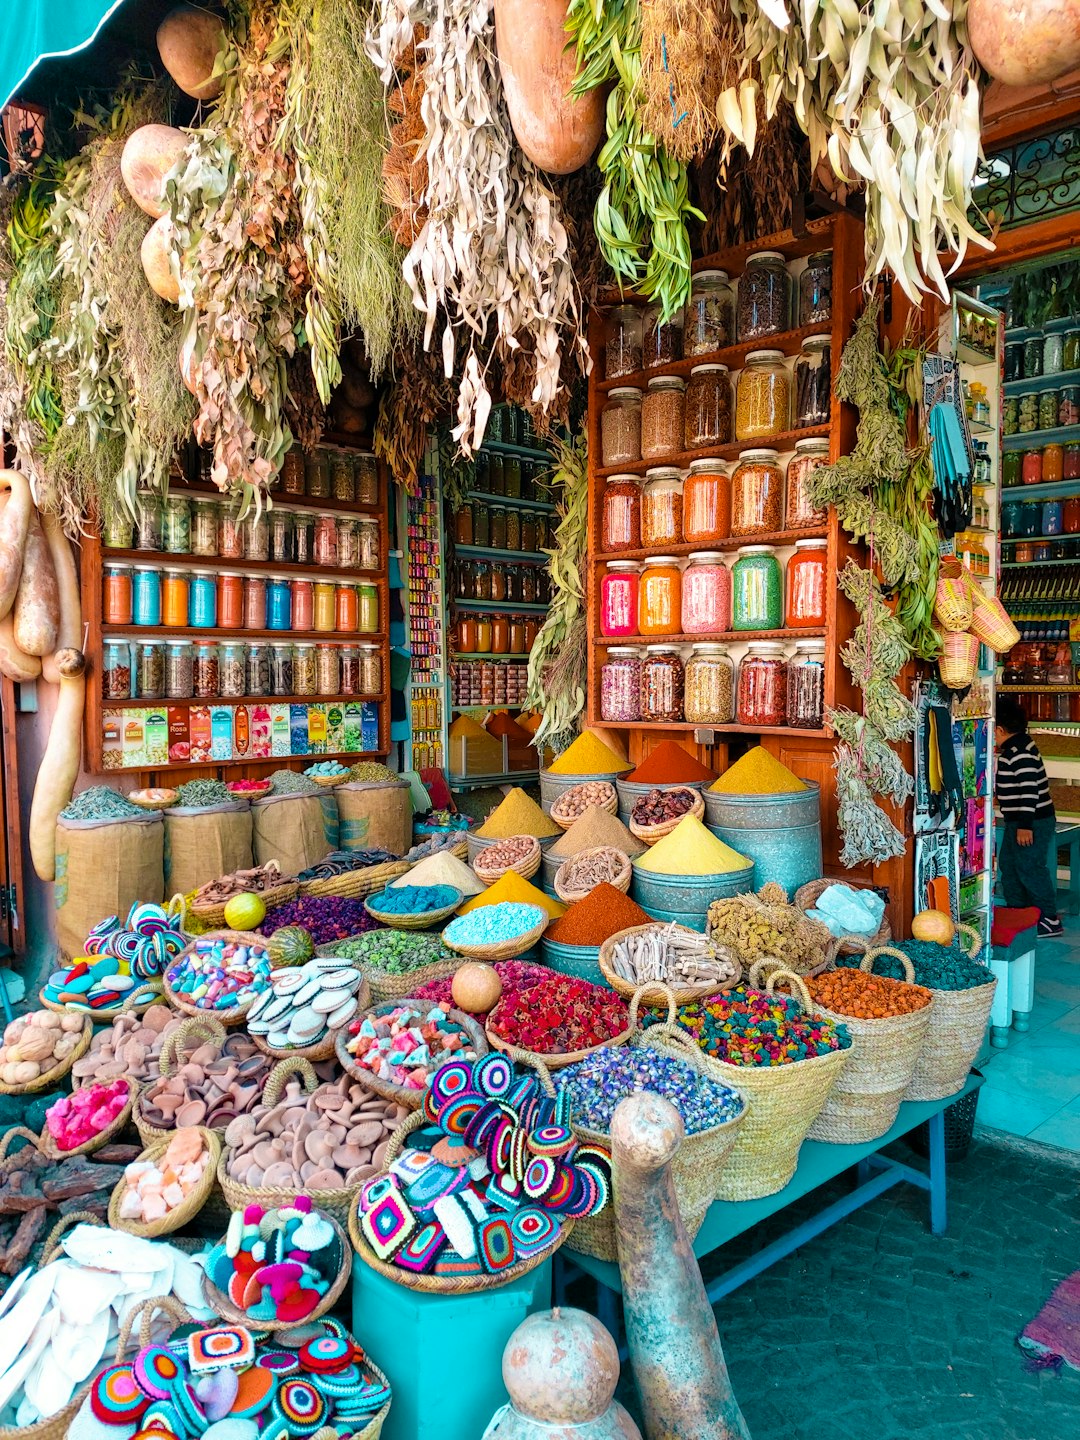 assorted color of wicker baskets on display